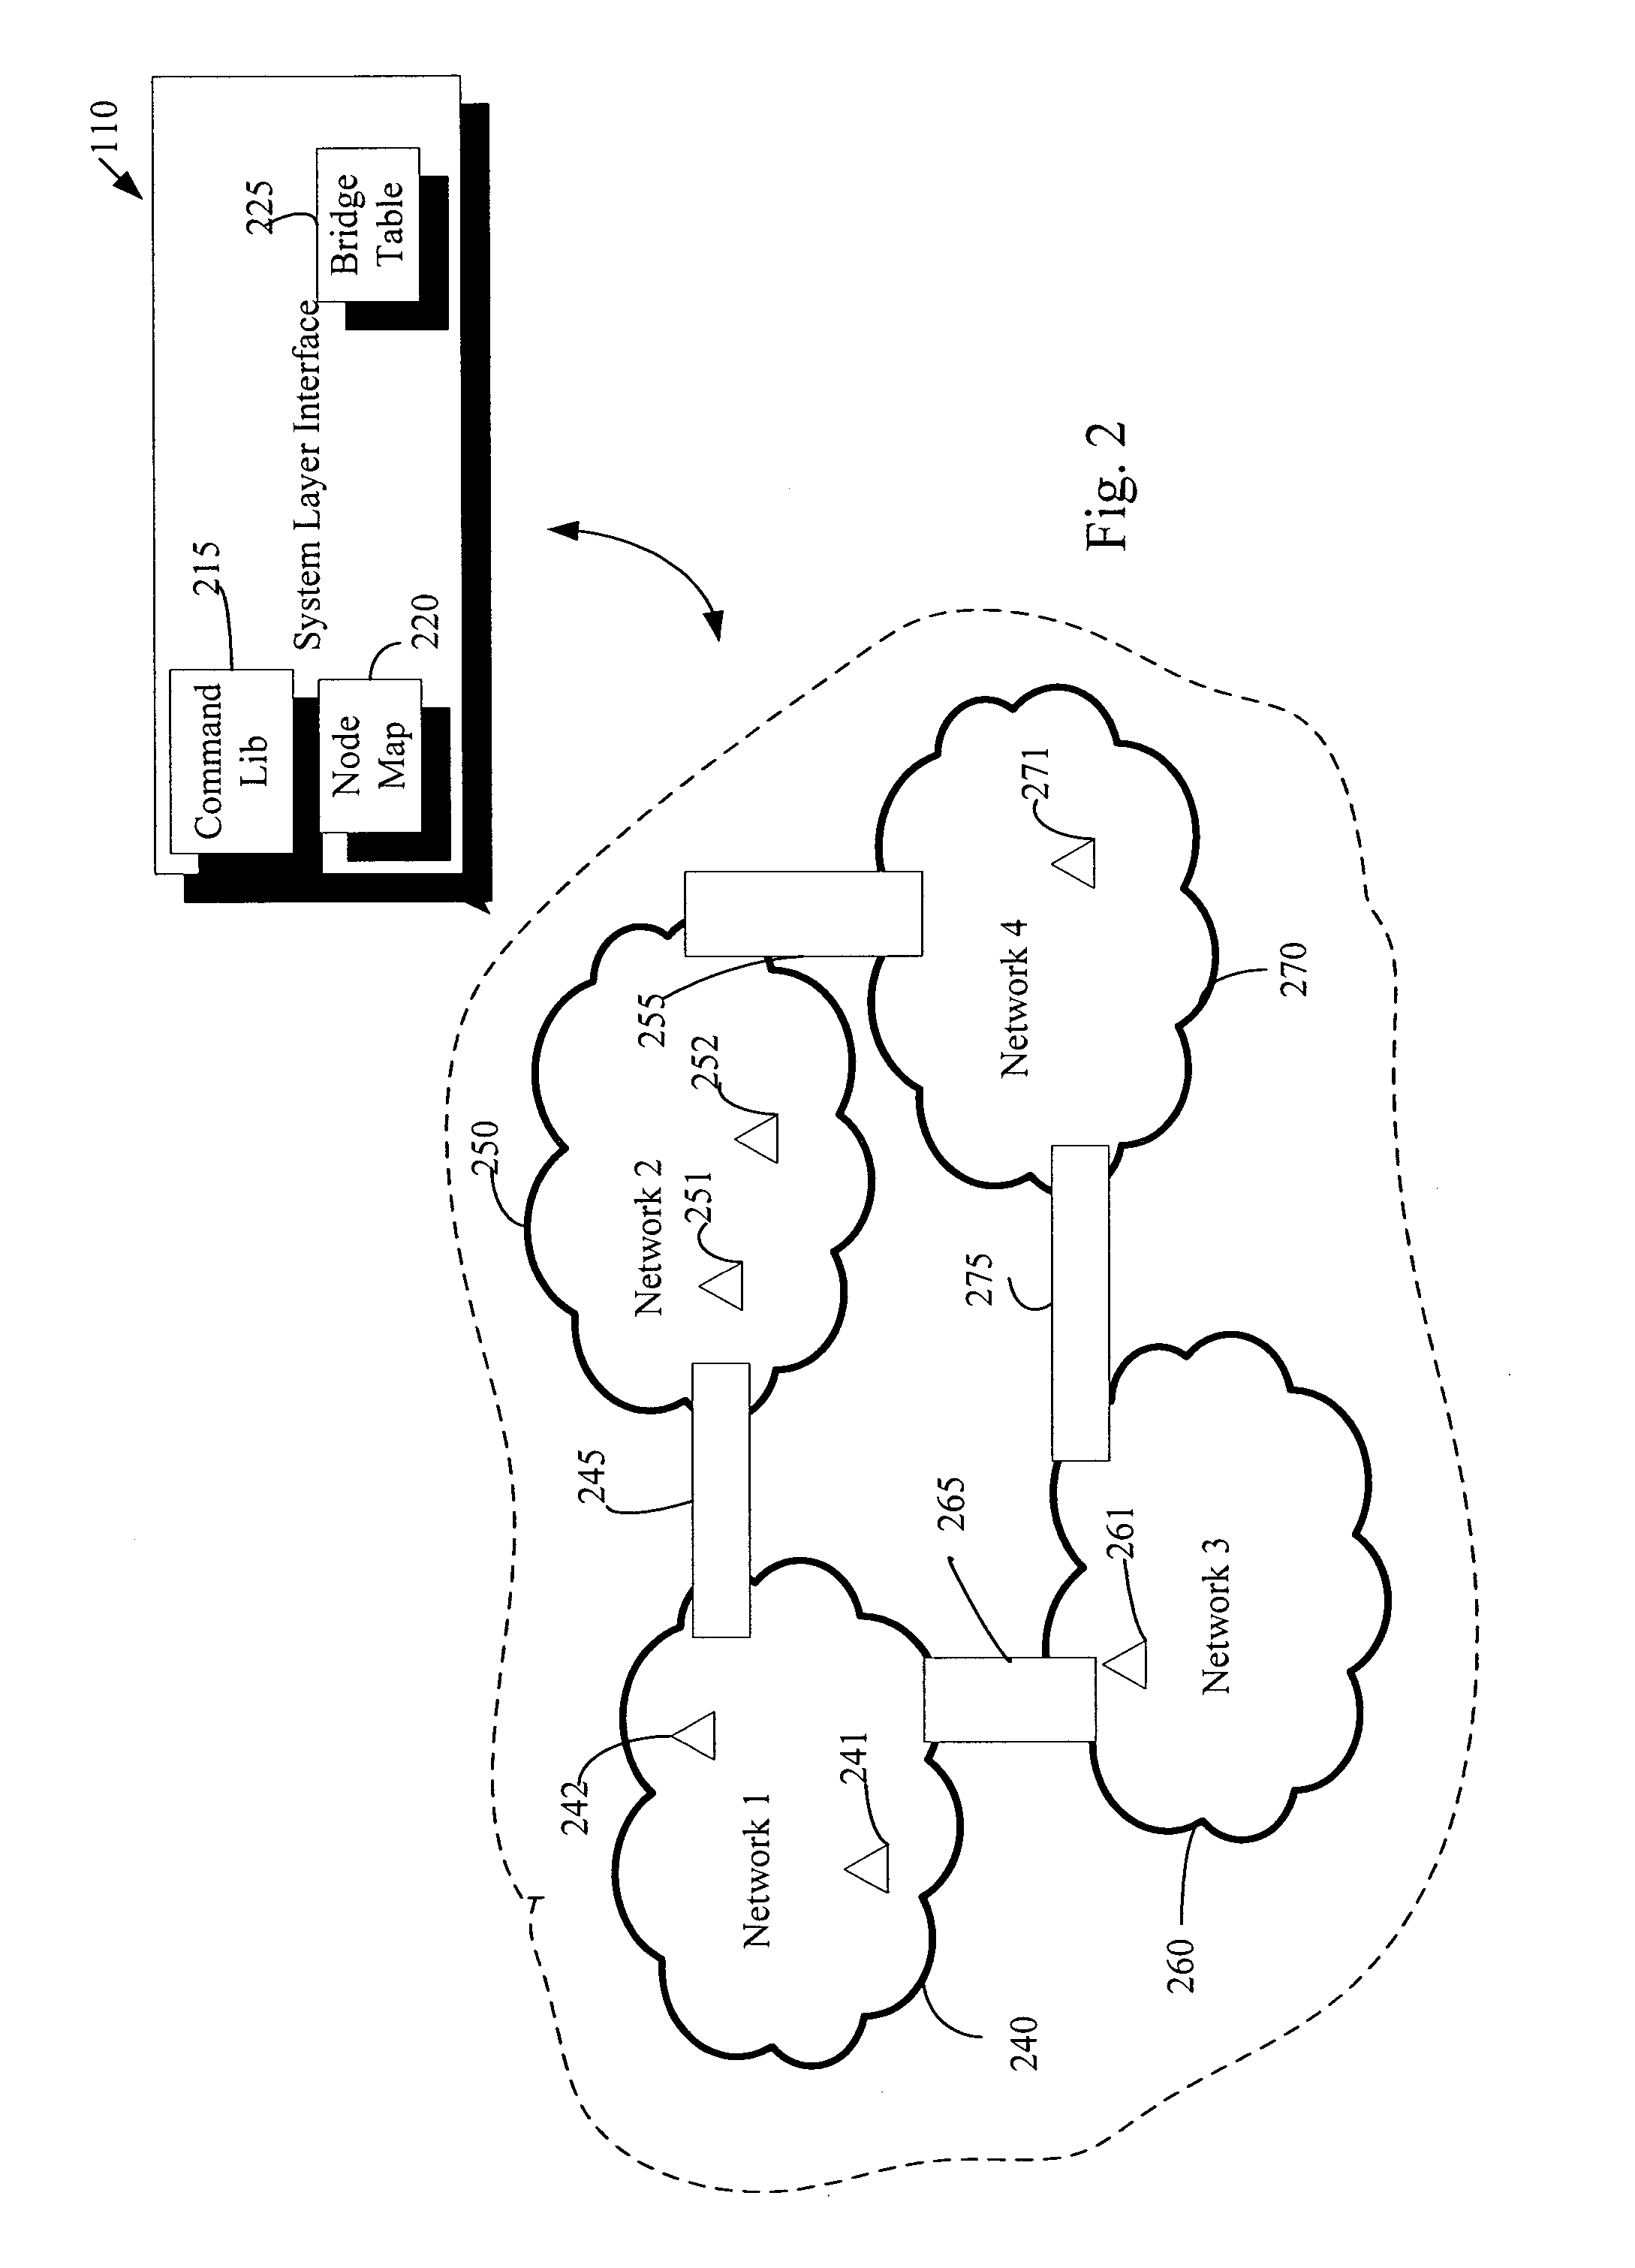 Device types and units for a home automation data transfer system